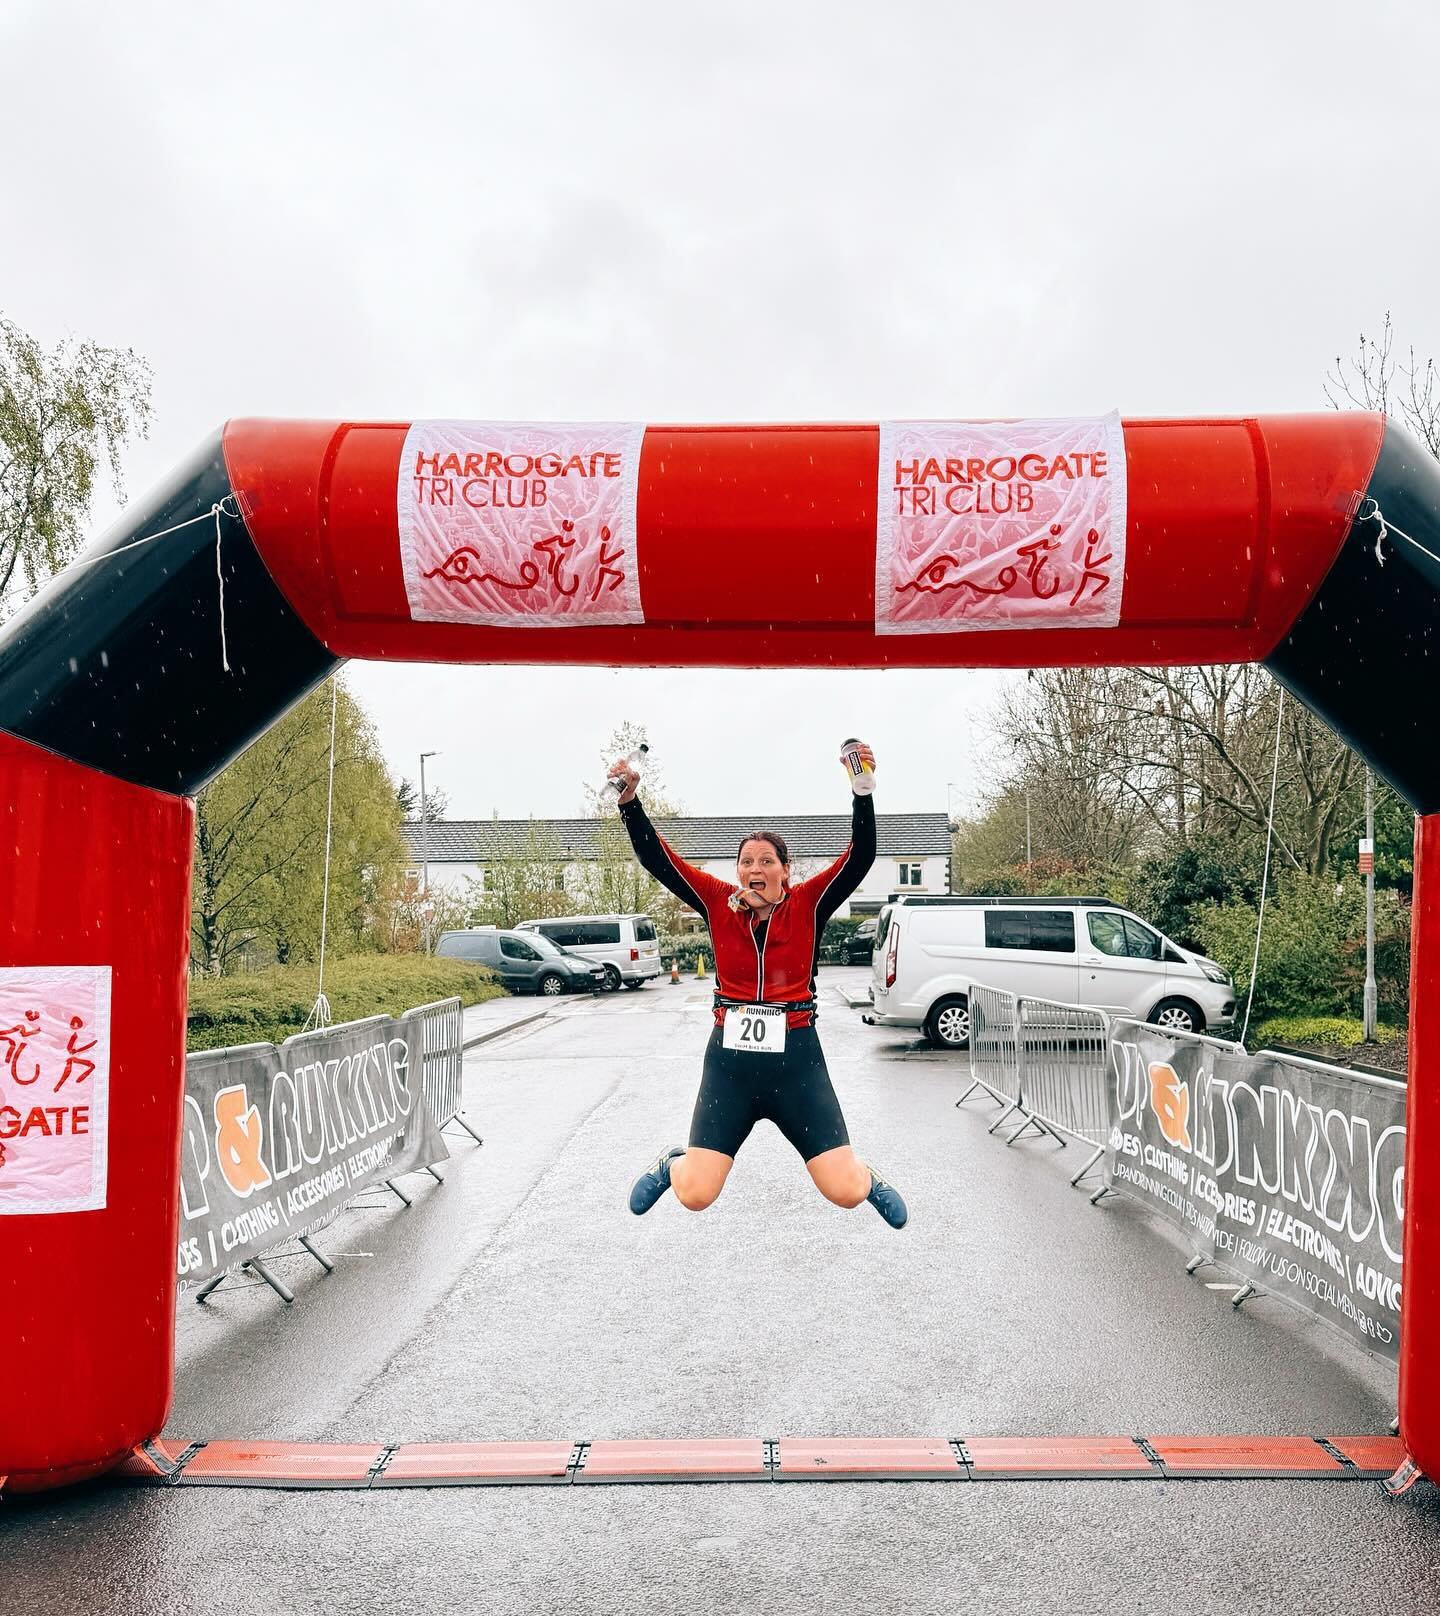 And that's a wrap 👏🏼
Massive thank you to all competitors &amp; volunteers at yesterday's triathlon. Despite the awful weather we saw some fab results 🤩 see you again next year! 

#triathlon #yorkshire